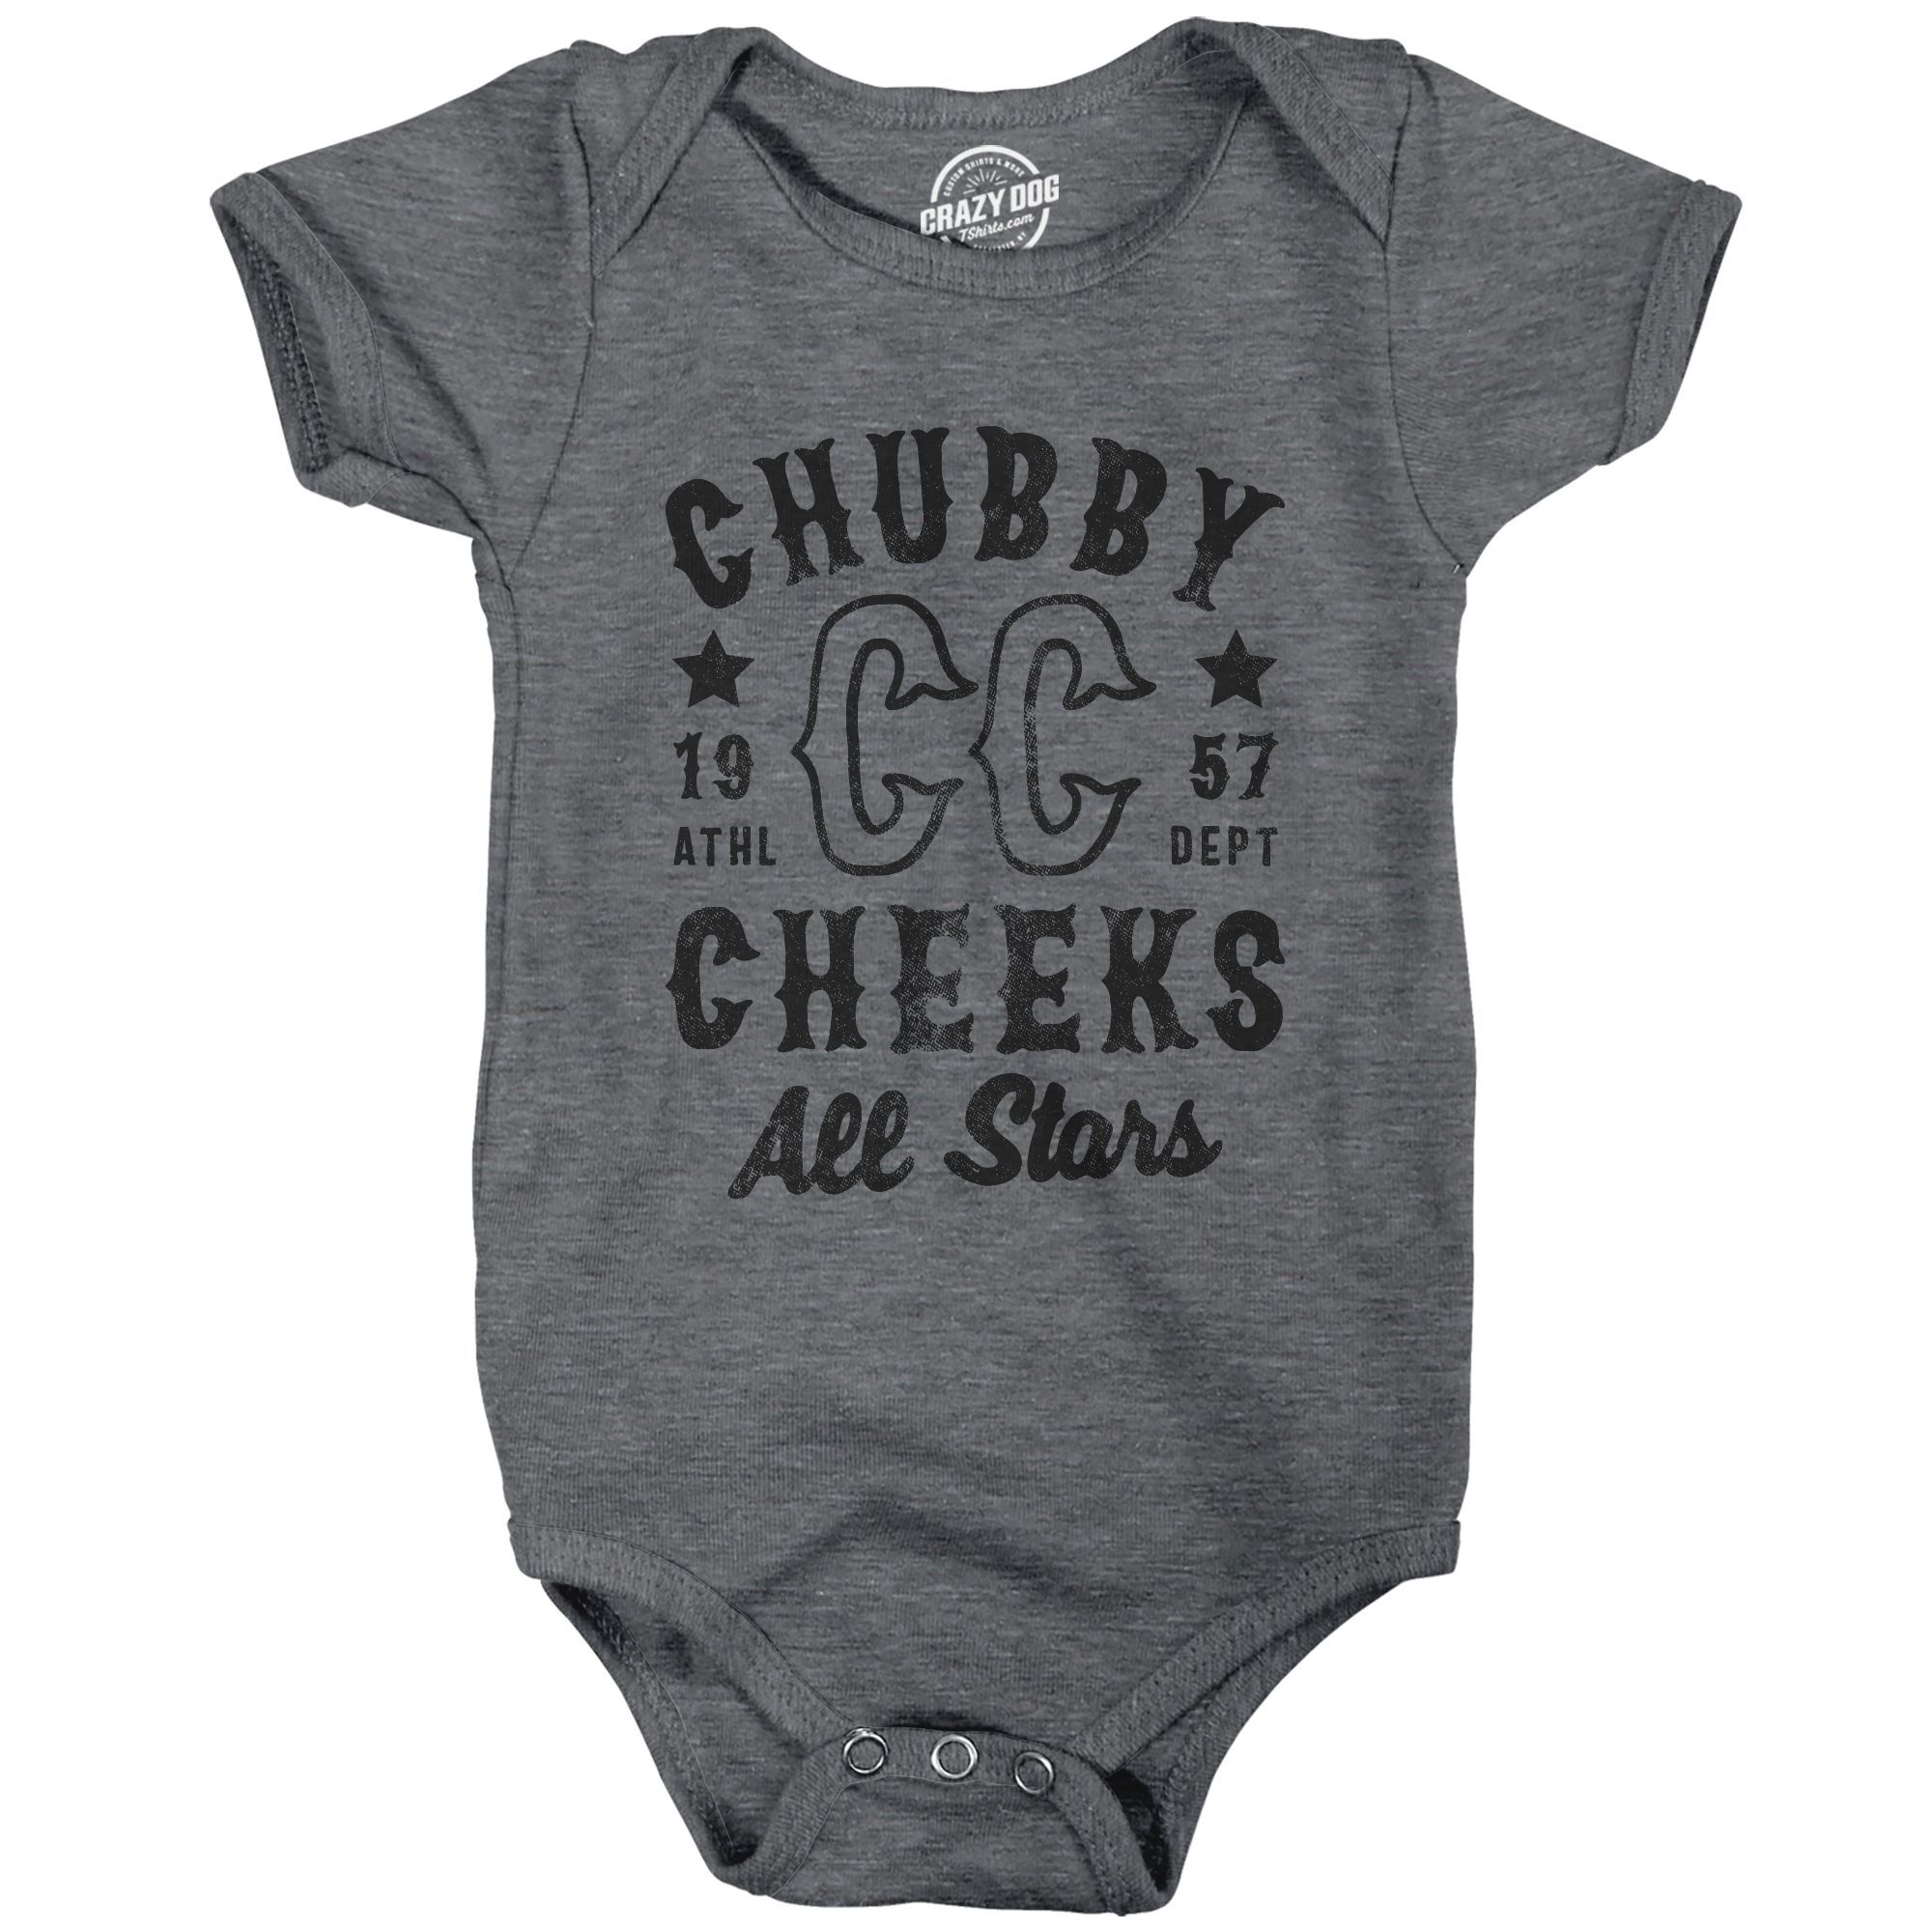 Crazy Dog Tshirts Chubby Cheeks All Stars Baby Bodysuit Funny Cute Sport Team Champs Jumper For Infants